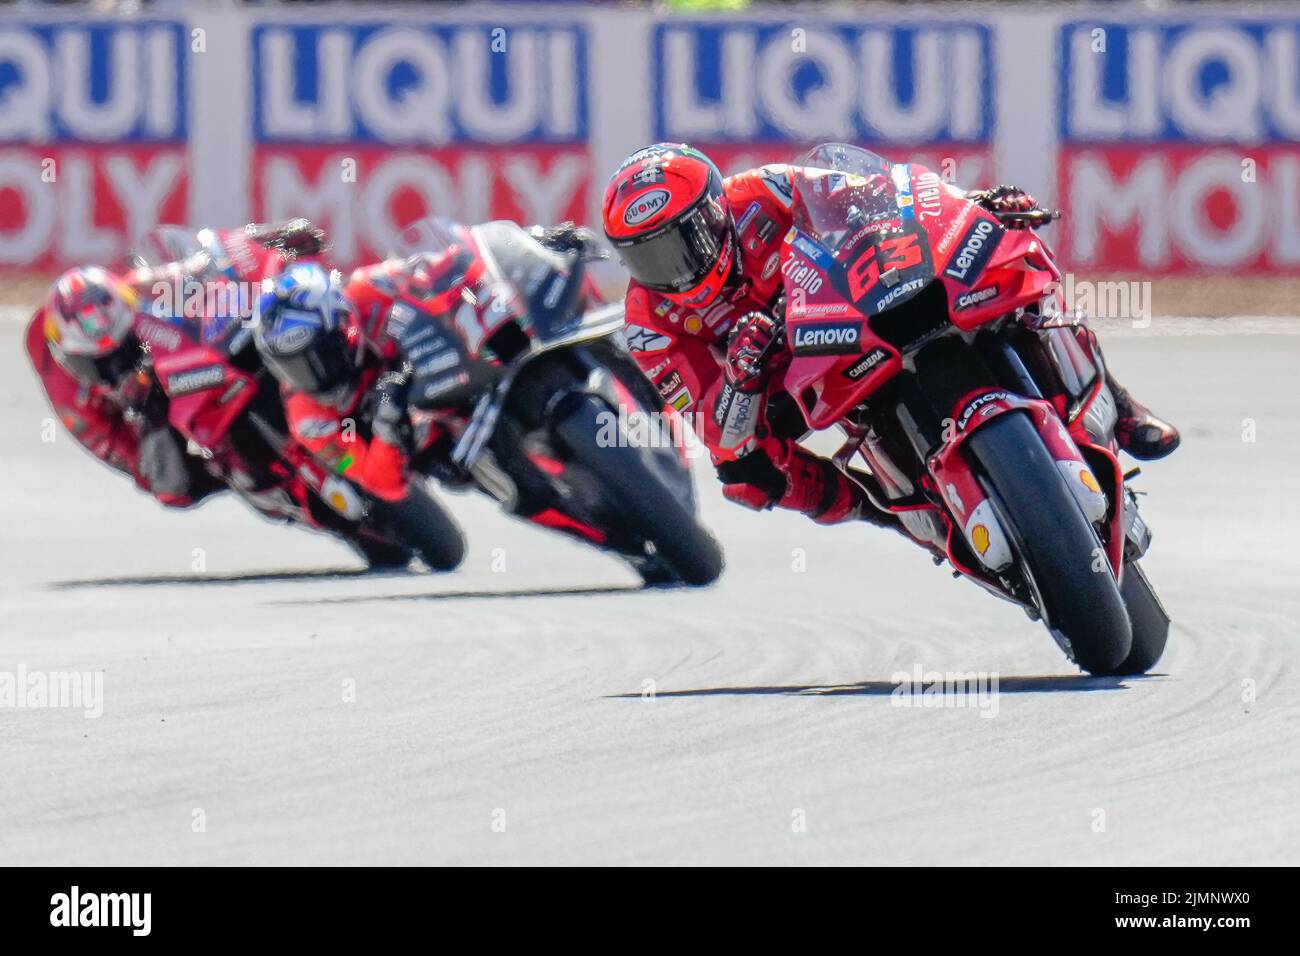 Towcester, UK. 07th Aug, 2022. Francesco BAGNAIA (Italy) of the Ducati Lenova Team on his way to winning the 2022 Monster Energy Grand Prix MotoGP Warm Up at Silverstone Circuit, Towcester, England on the 7th August 2022. Photo by David Horn. Credit: PRiME Media Images/Alamy Live News Stock Photo